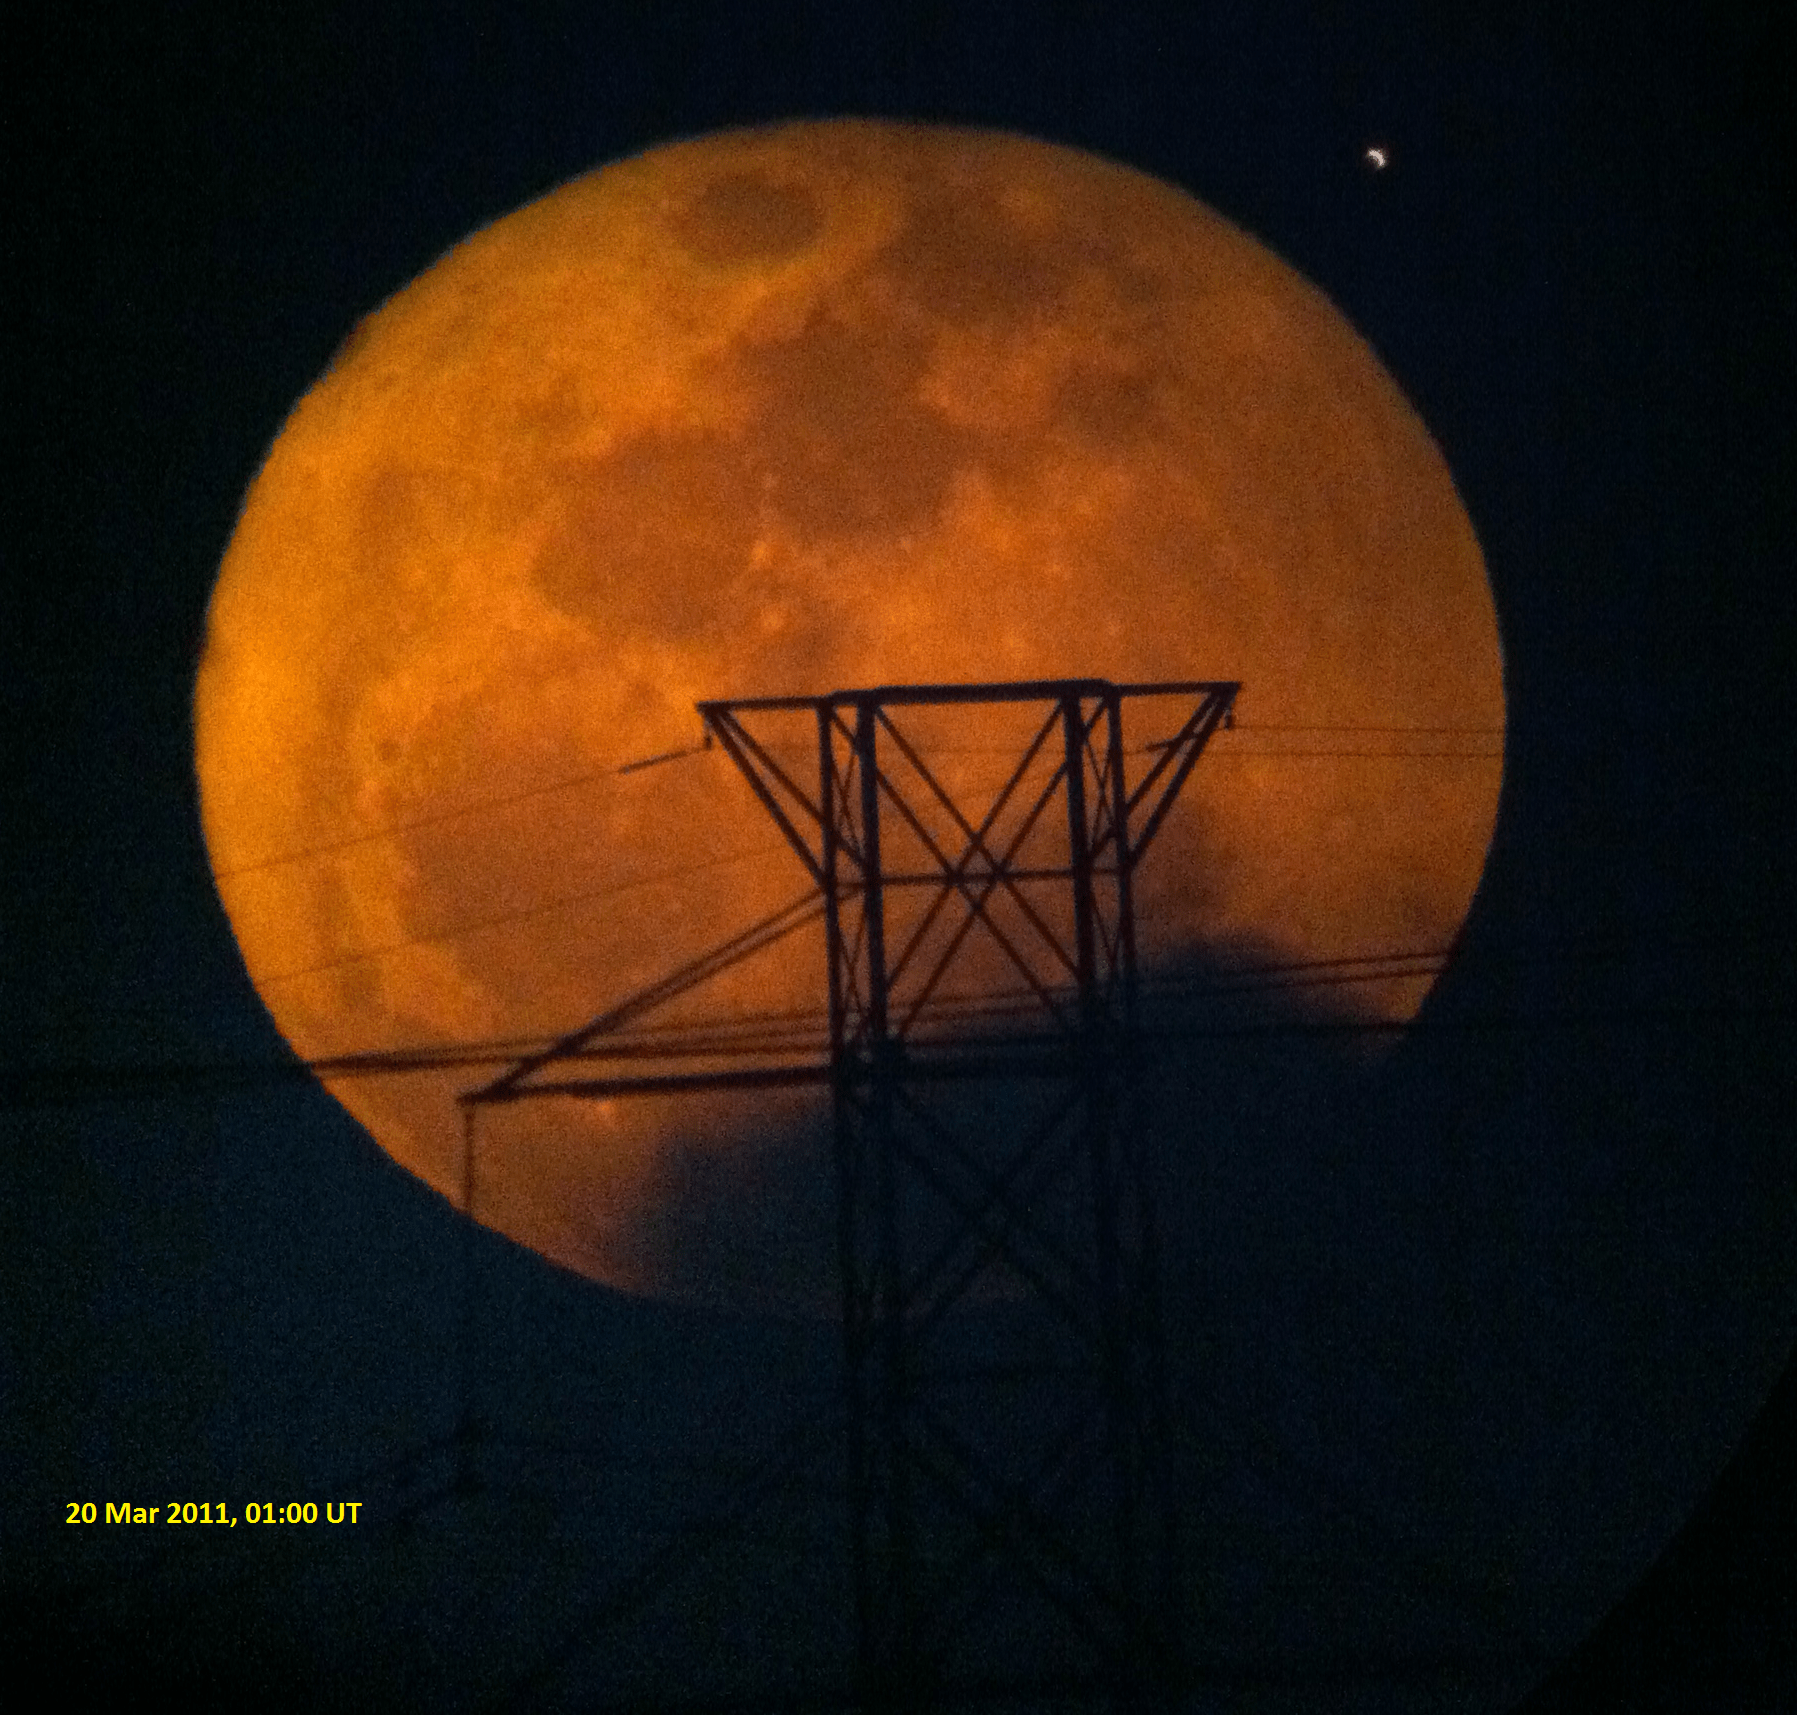 Your Pictures of the "Super" Full Moon Universe Today